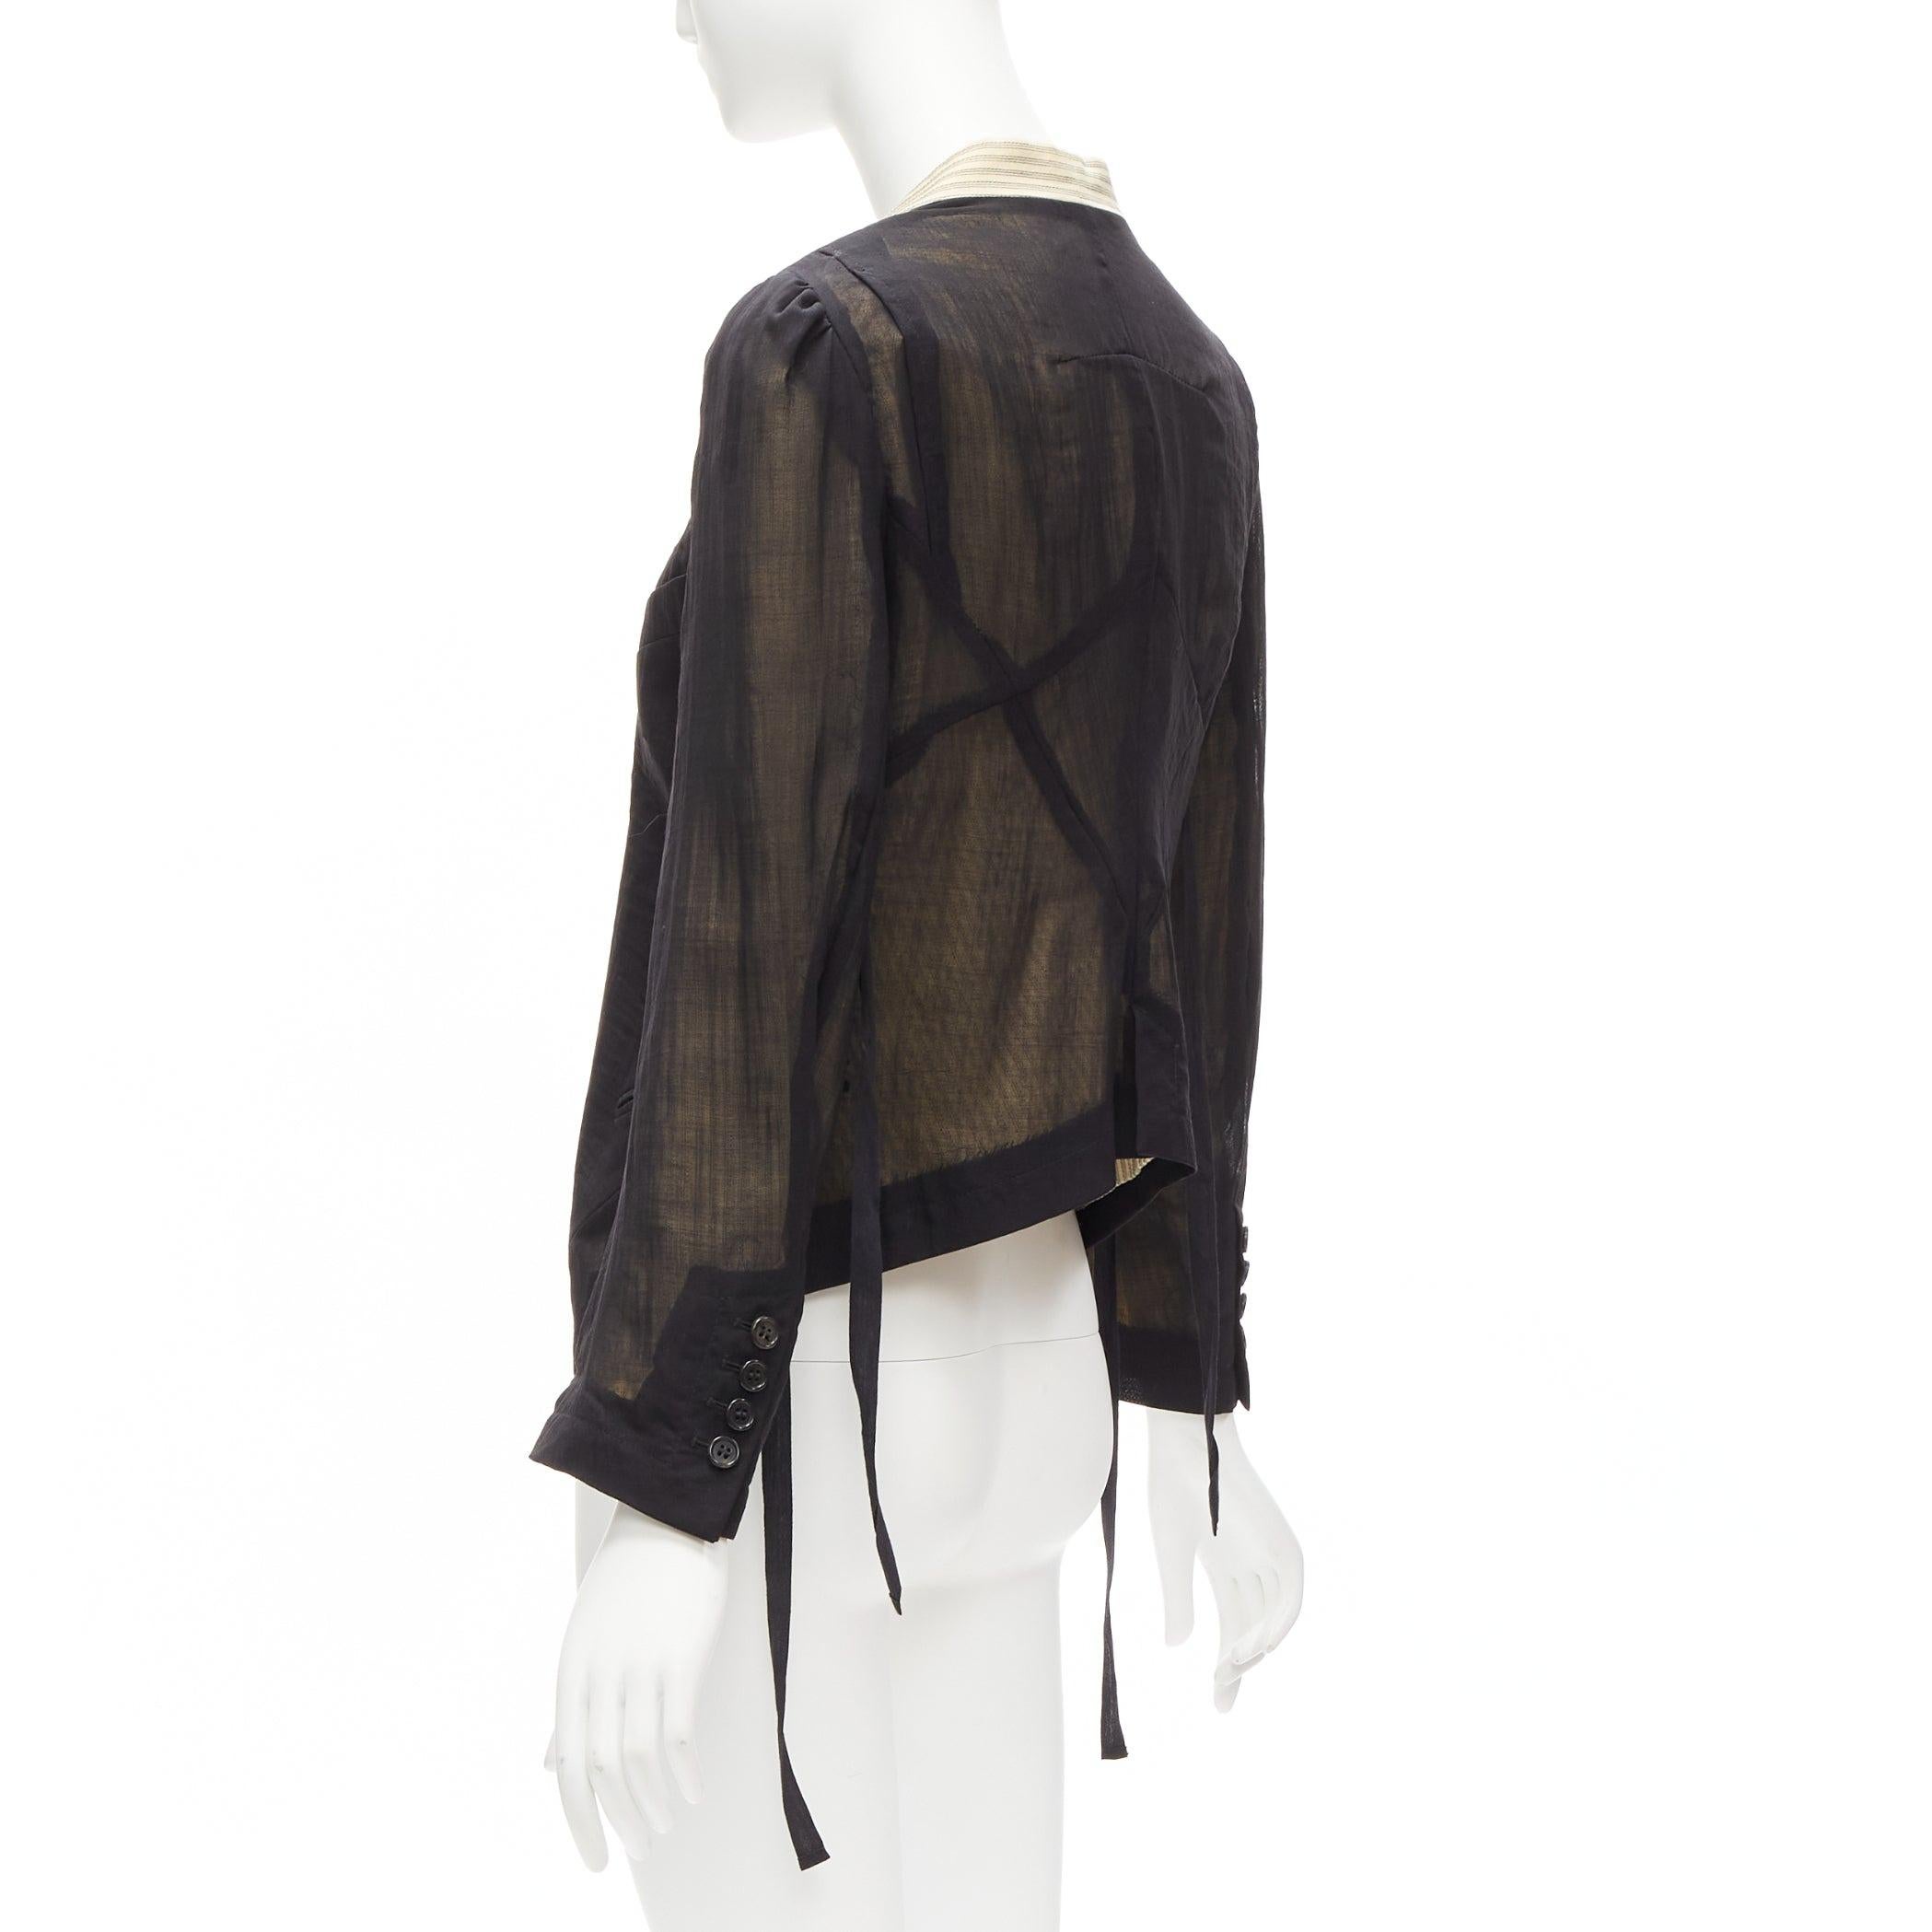 ANN DEMEULEMEESTER black overlay sheer cream topstitched jacket FR36 S For Sale 2